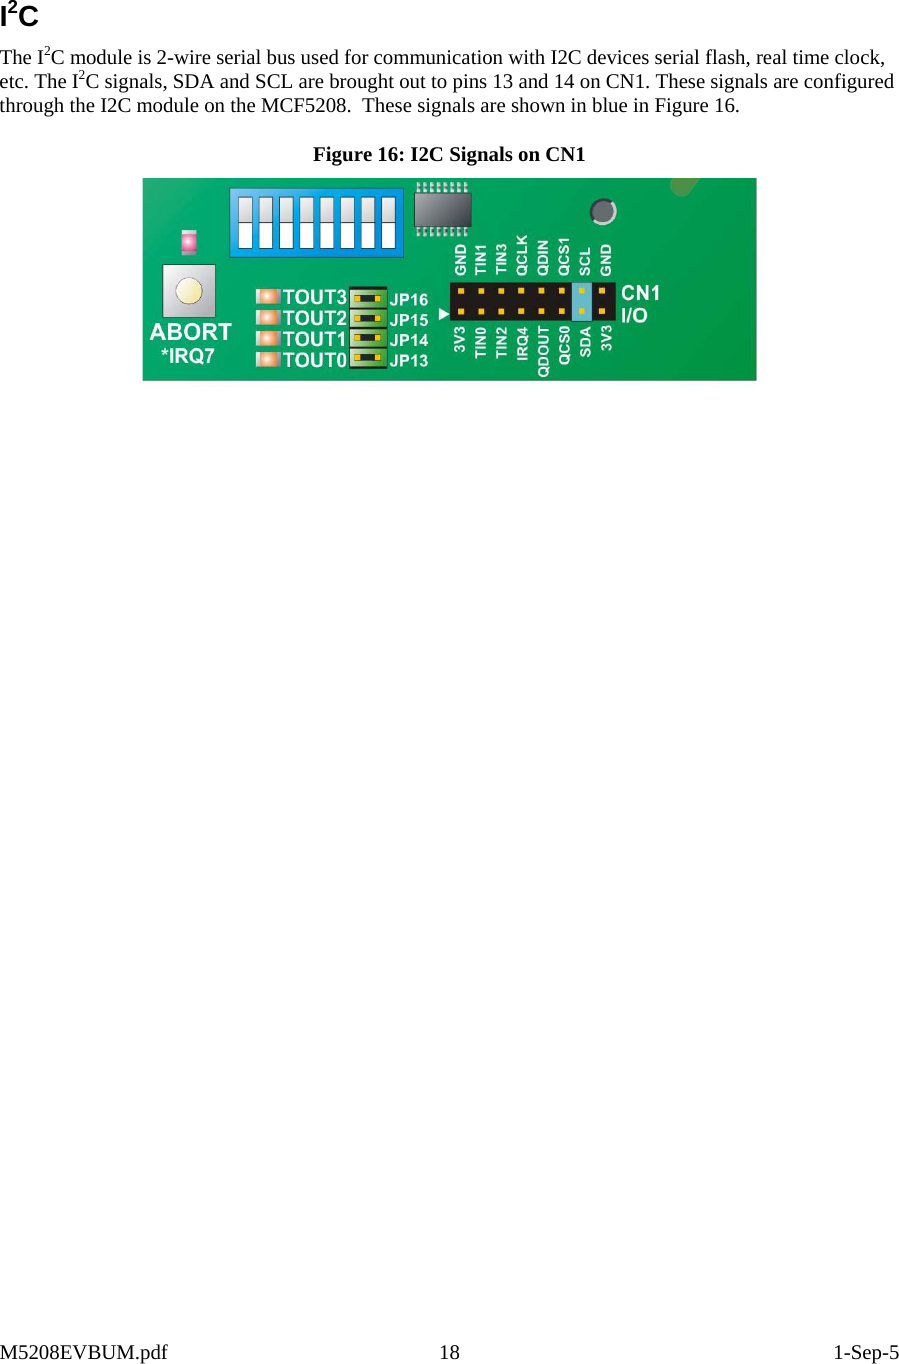   I2C The I2C module is 2-wire serial bus used for communication with I2C devices serial flash, real time clock, etc. The I2C signals, SDA and SCL are brought out to pins 13 and 14 on CN1. These signals are configured through the I2C module on the MCF5208.  These signals are shown in blue in Figure 16. Figure 16: I2C Signals on CN1   M5208EVBUM.pdf 18  1-Sep-5 